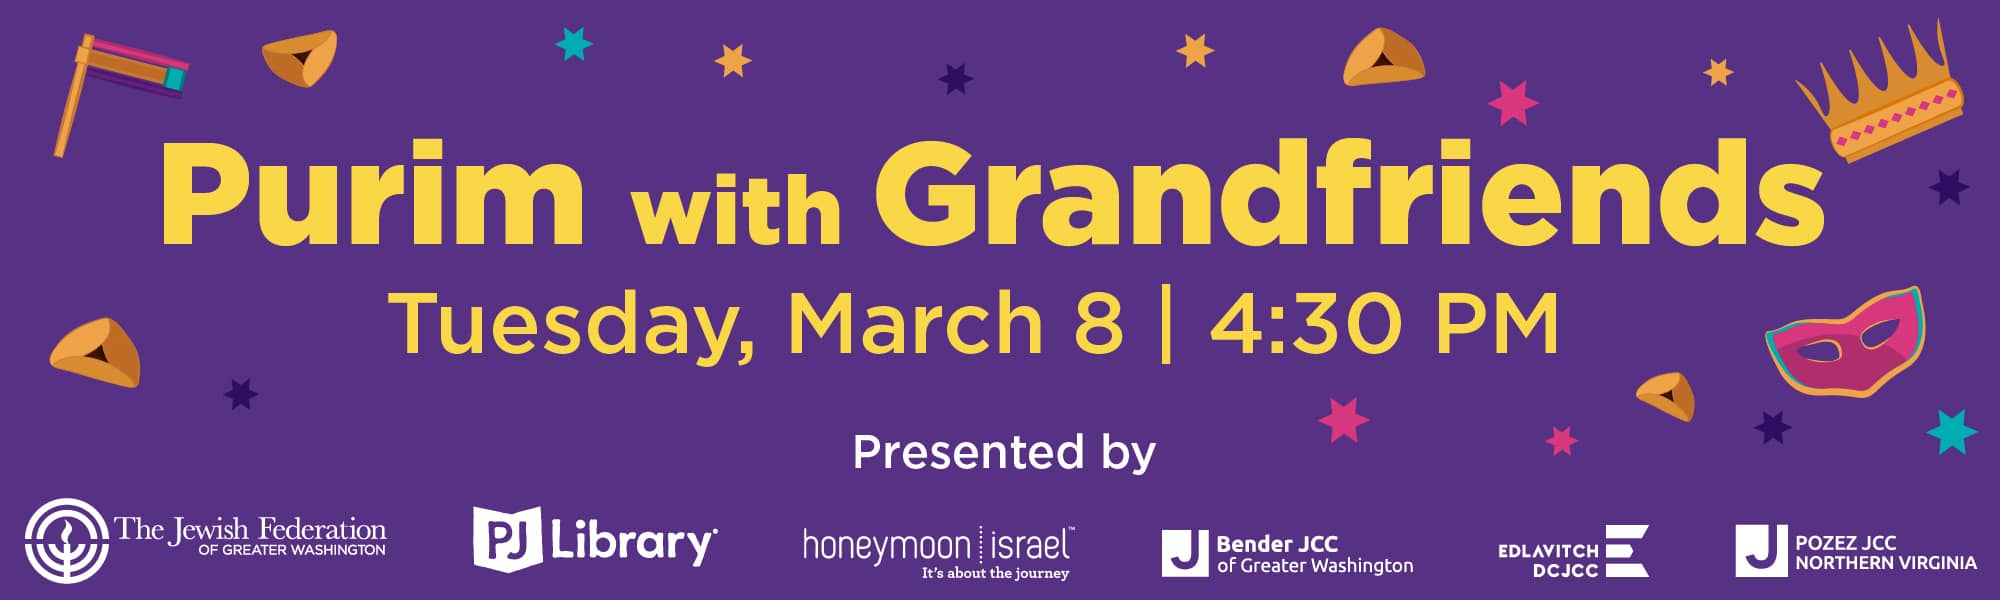 Purim with Grandfriends Tuesday, March 8 | 4:30 PM